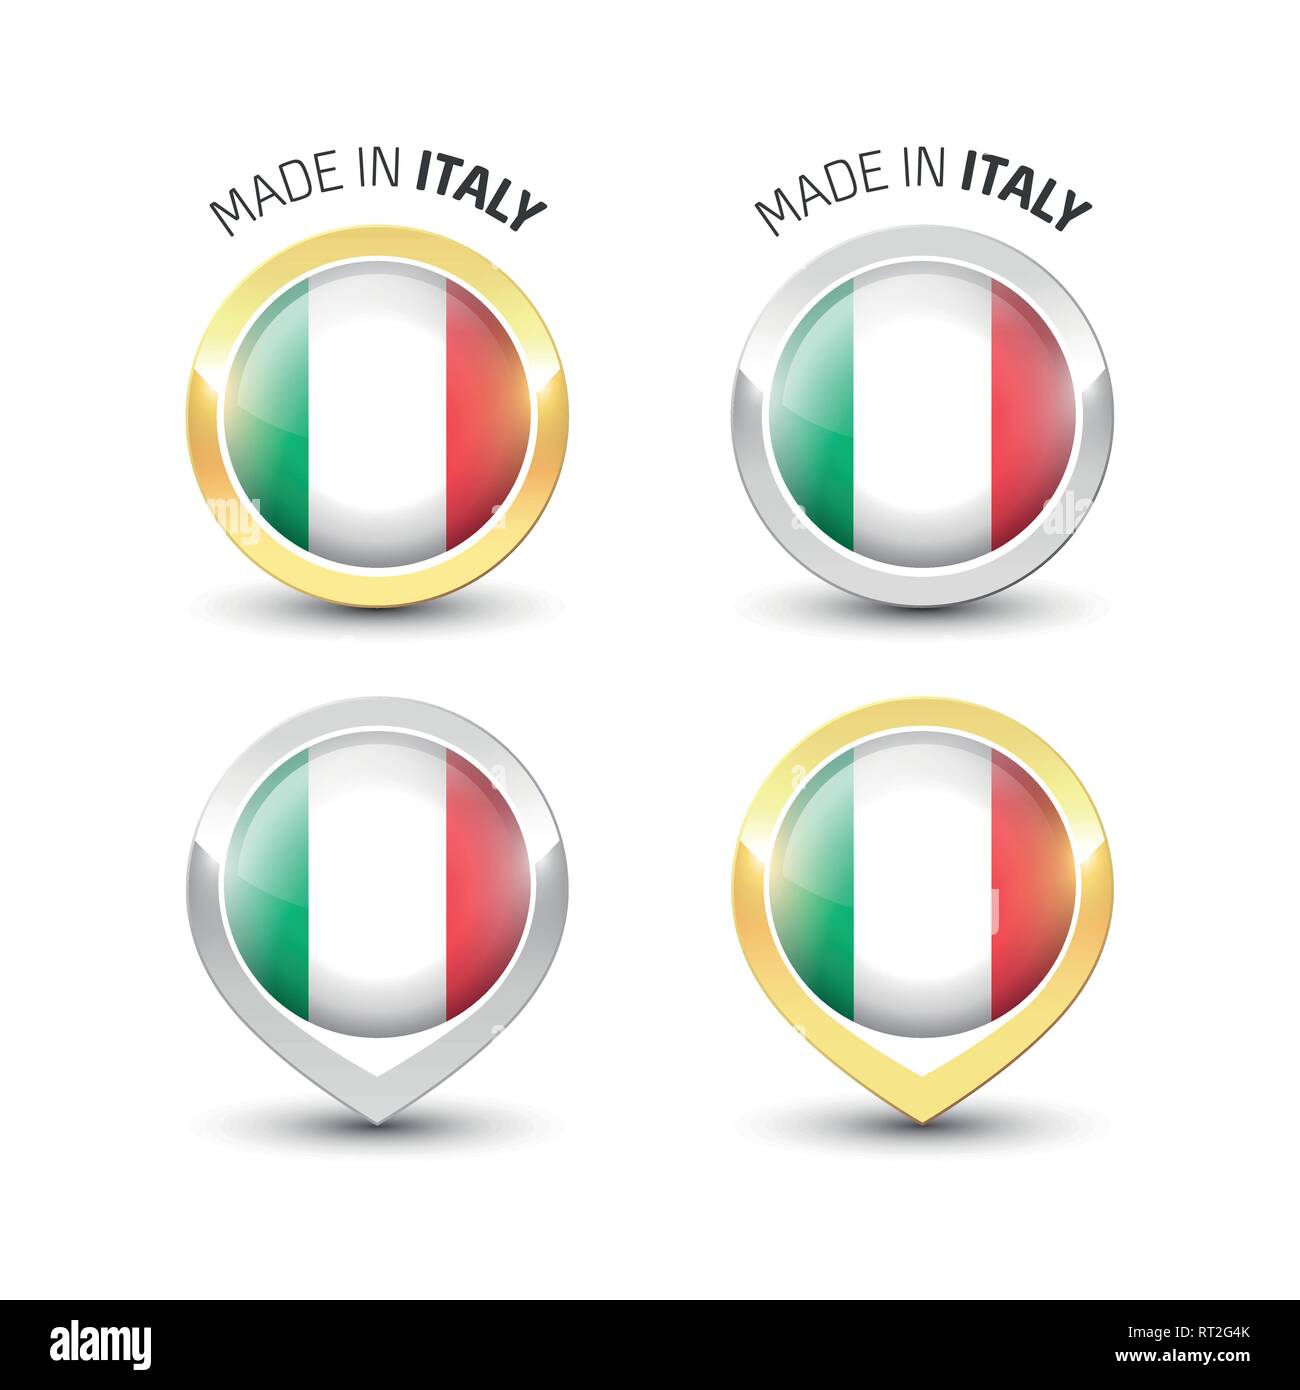 Made in Italy - Guarantee label with the Italian flag inside round gold and silver icons. Stock Vector